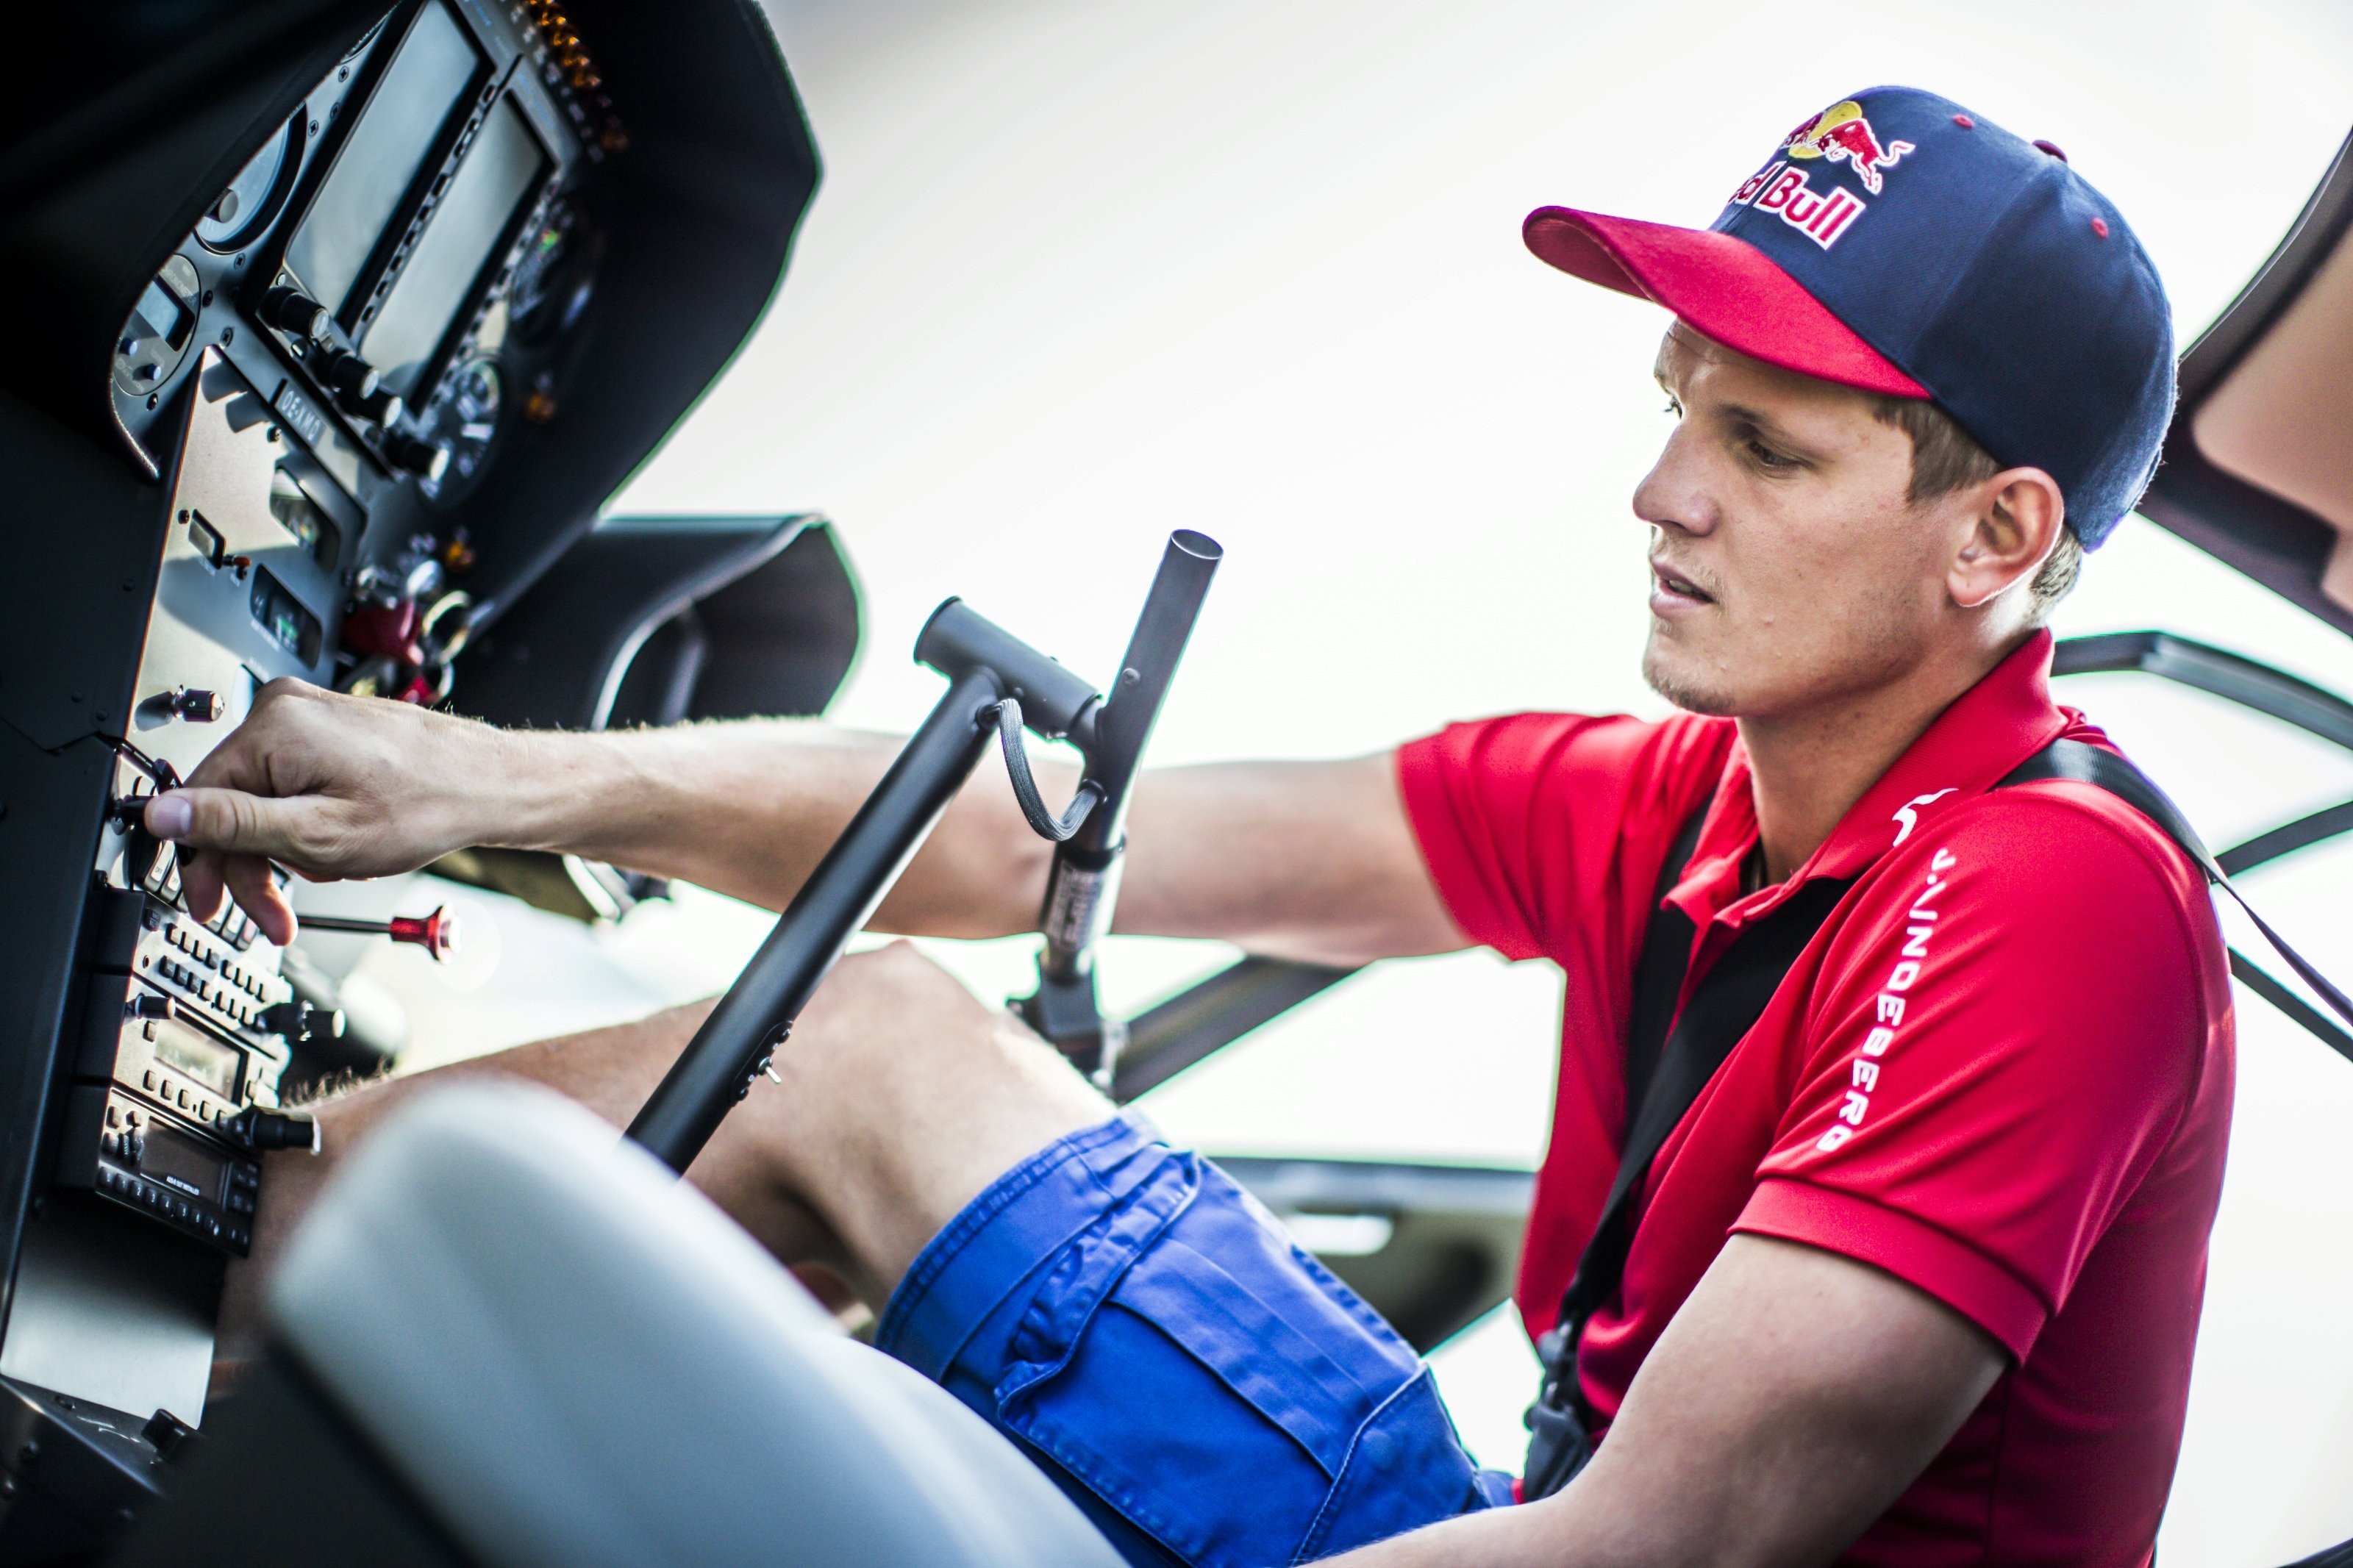 Thomas bei den World Helicopter Championships 2015